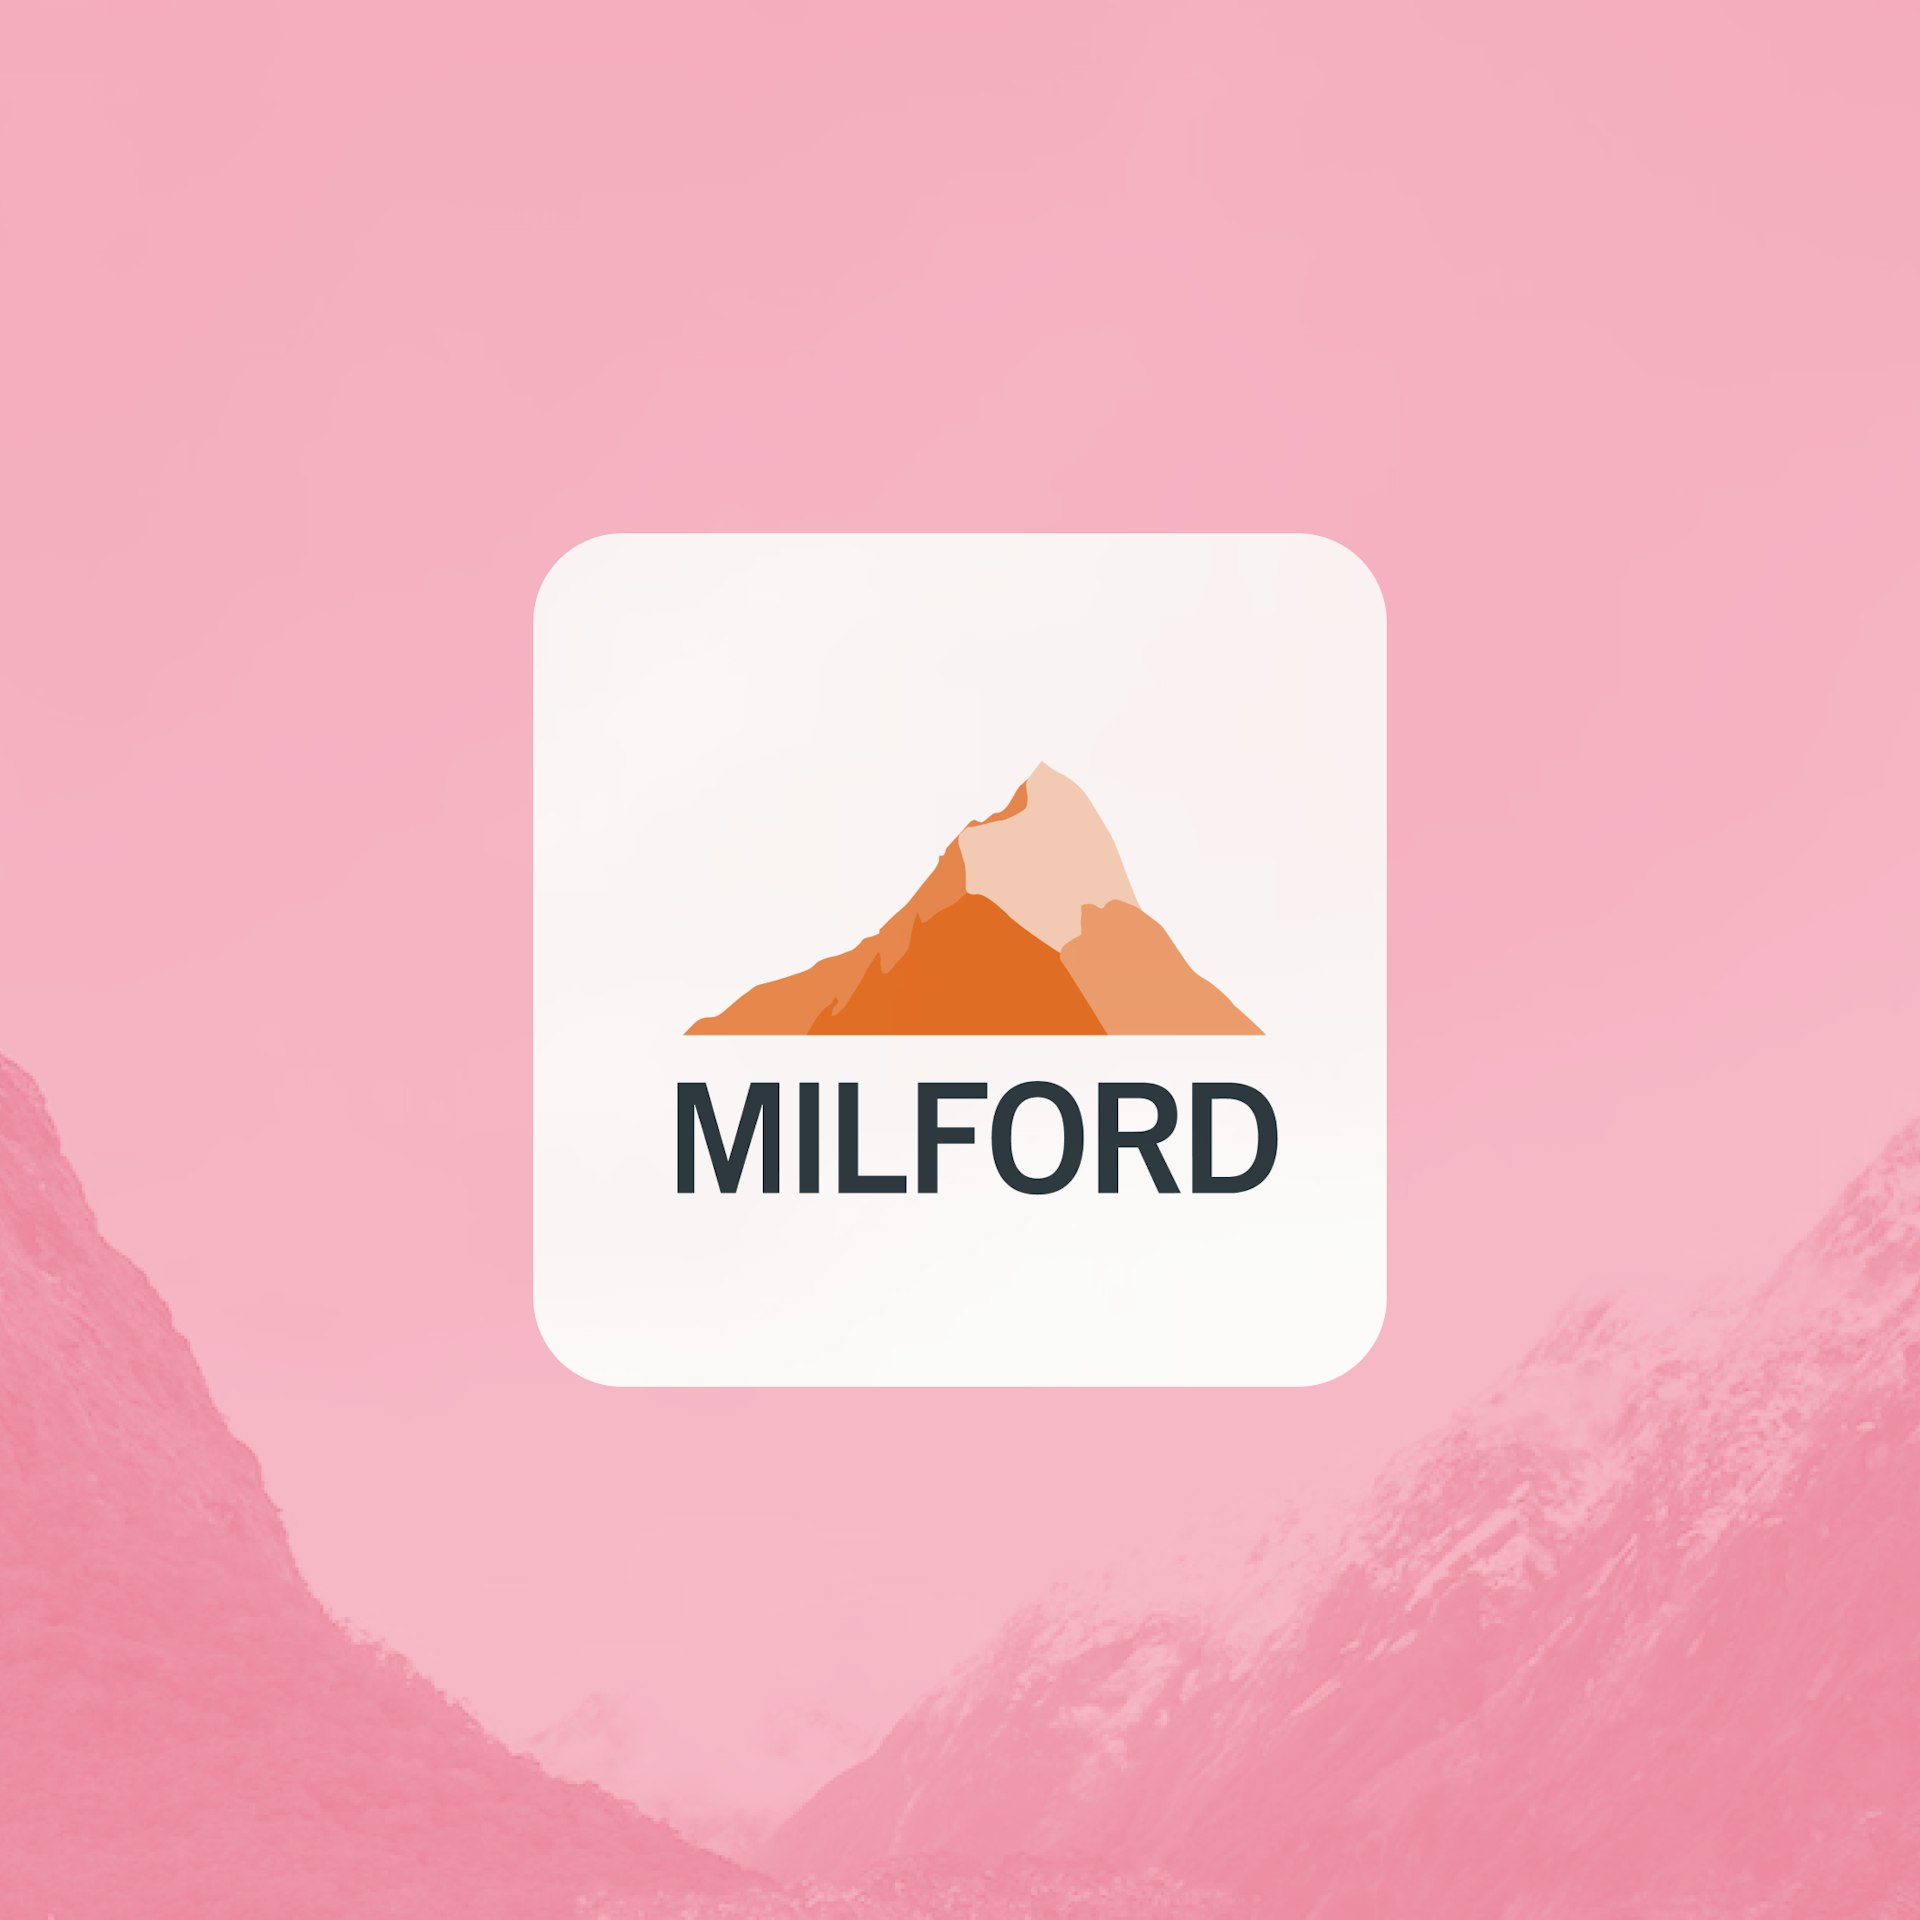 The Milford name and orange mountain logo are set within a white rounded square, which is centred within a pink-coloured image of a mountain range. 